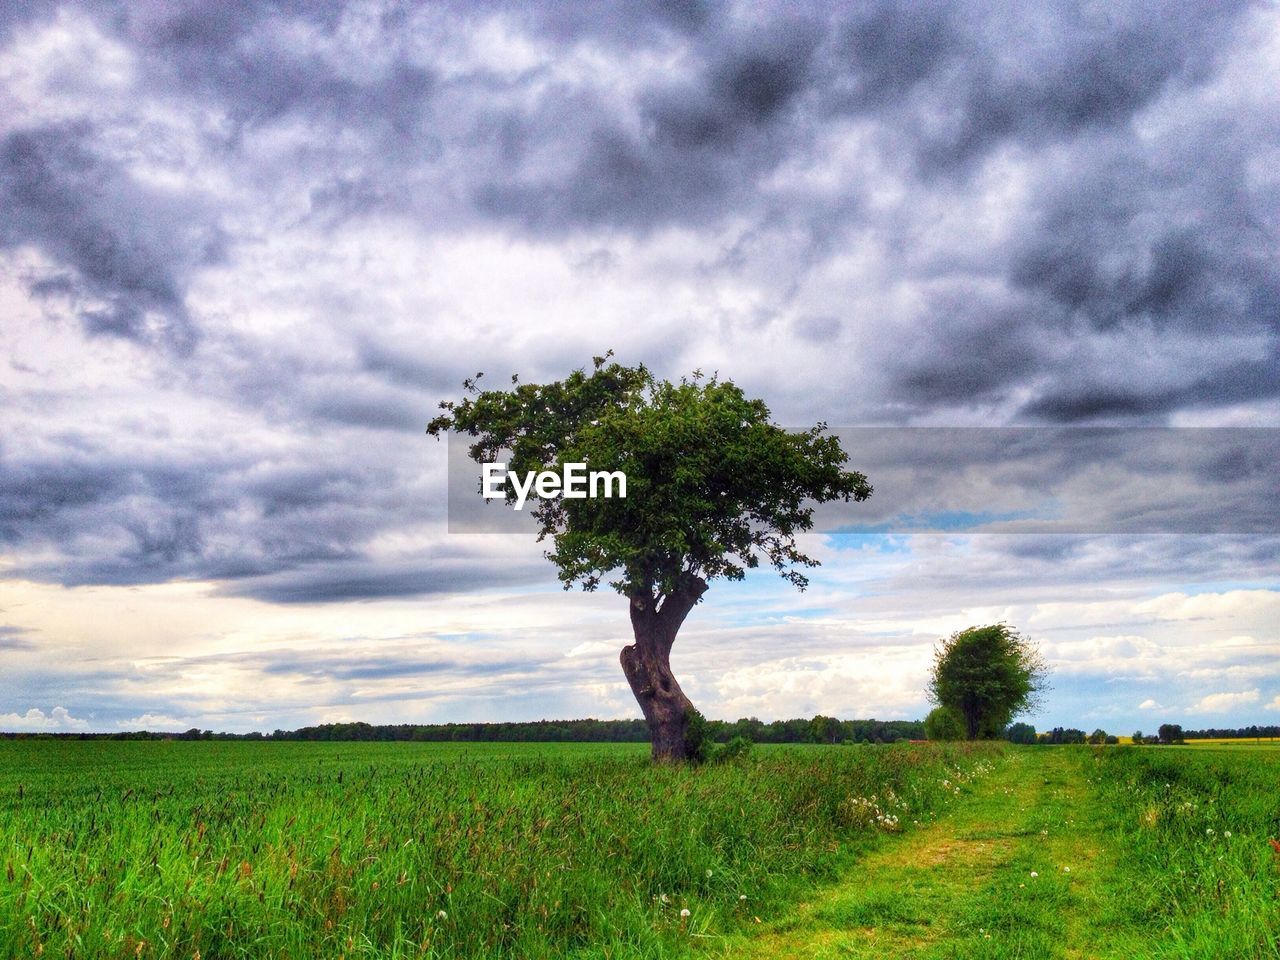 Tree growing on grassy field against cloudy sky